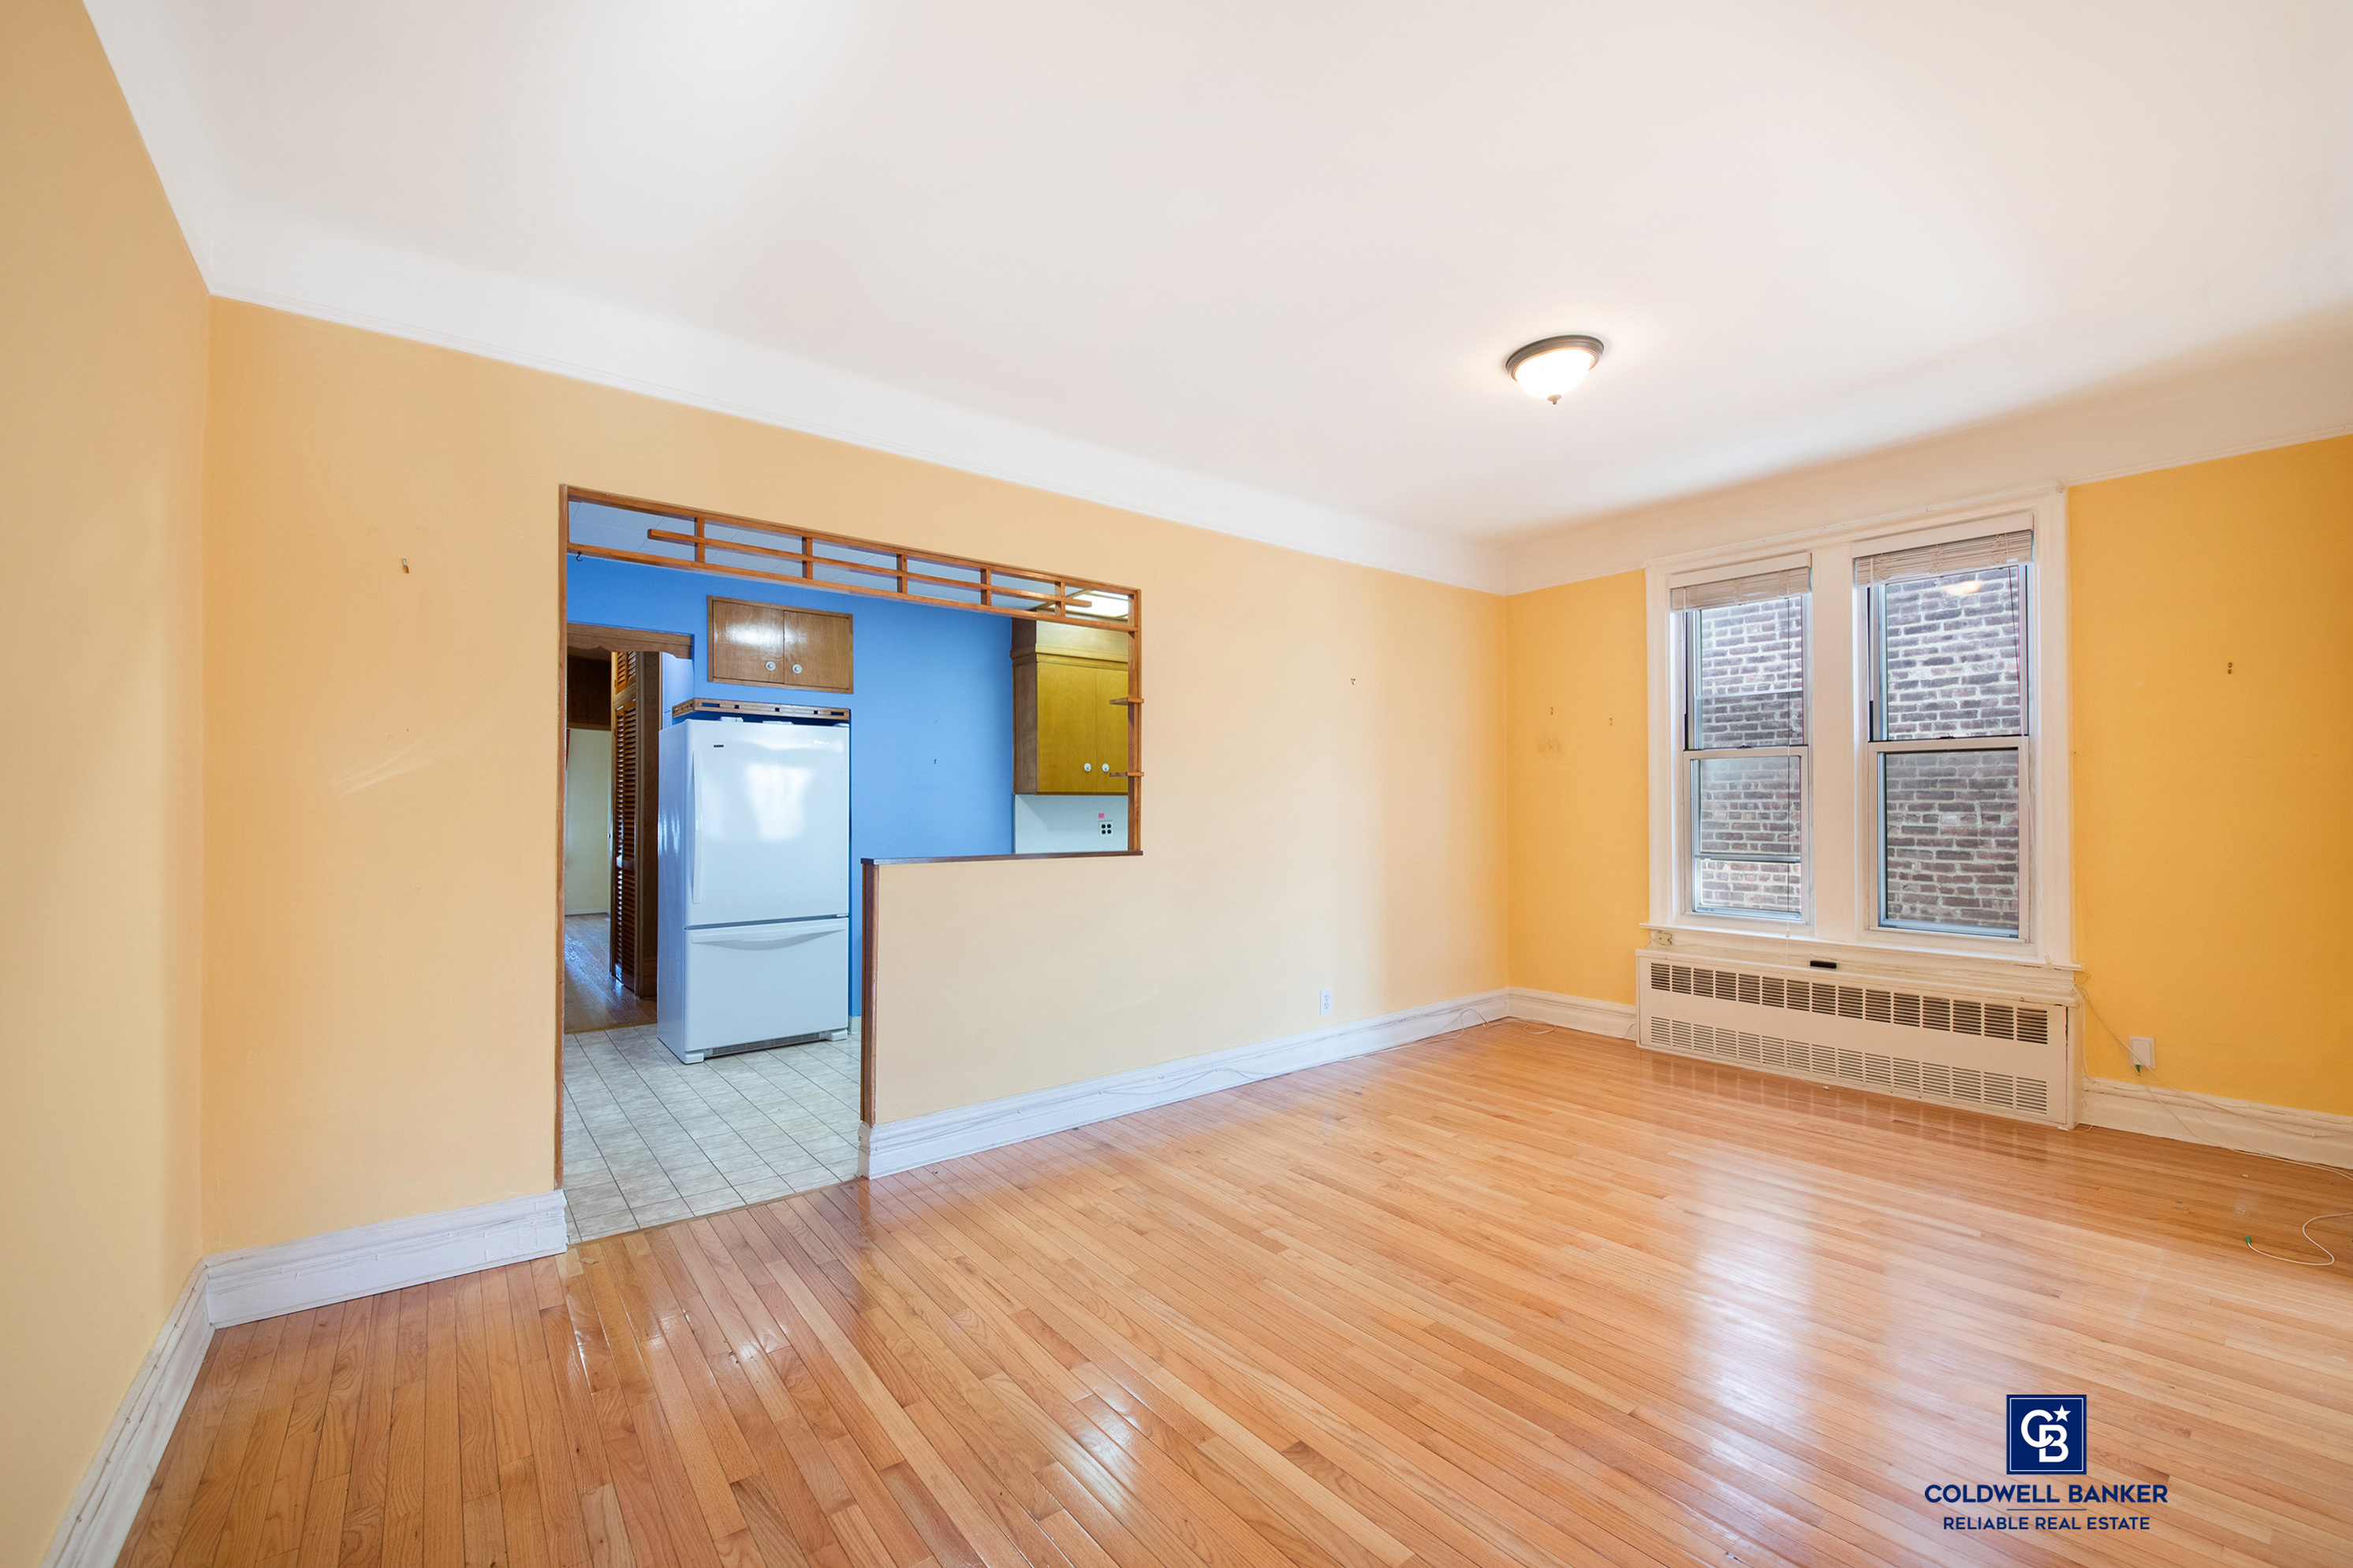 457 84th Street, Brooklyn, New York, 11209, United States, 6 Bedrooms Bedrooms, ,3 BathroomsBathrooms,Residential,For Sale,457 84th Street,1506642